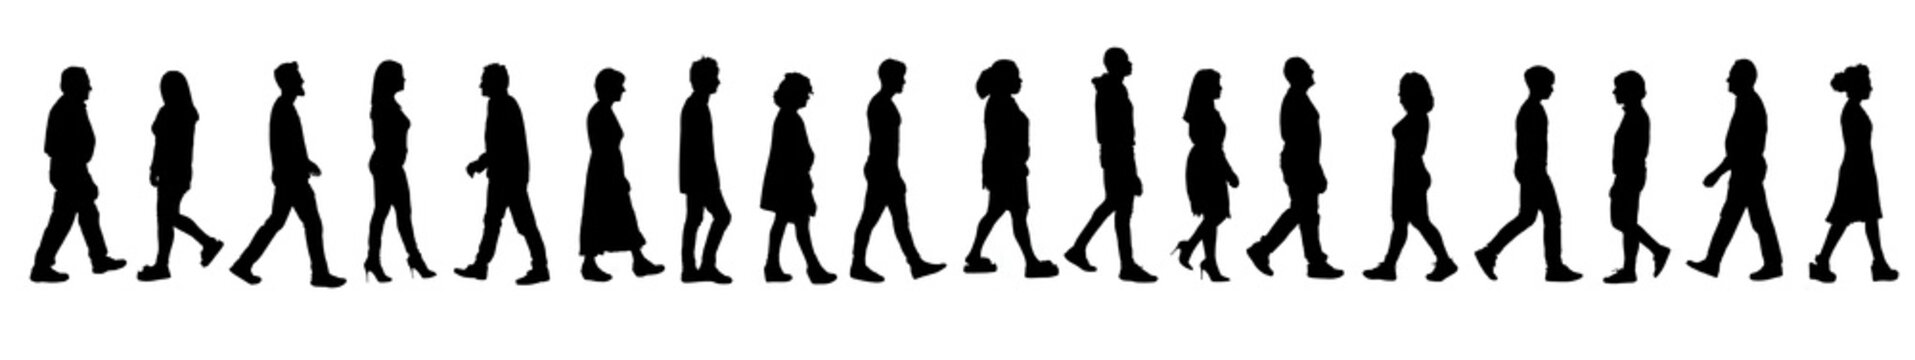 silhouette of a line of group of a people walking on white background